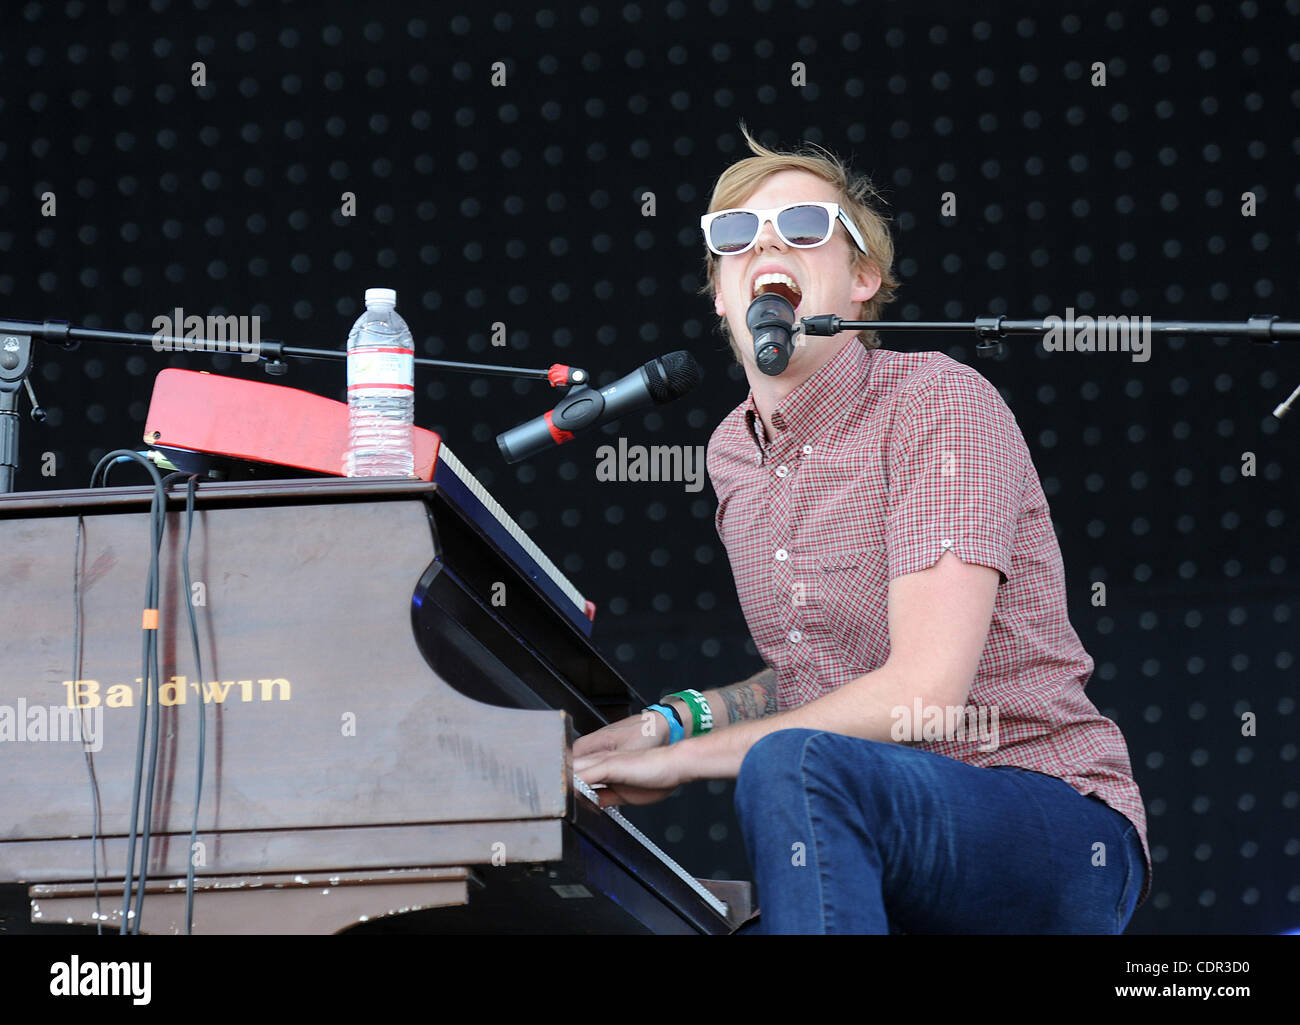 Apr 17, 2011 - Indio, California; USA - Musiciain ANDREW MCMAHON of the band Jack's Mannequin performs live as part of the 2011 Coachella Music & Arts Festival that is taking place at the Empire Polo Field.  The three day festival will attract thousands of fans to see a variety of artist on six diff Stock Photo